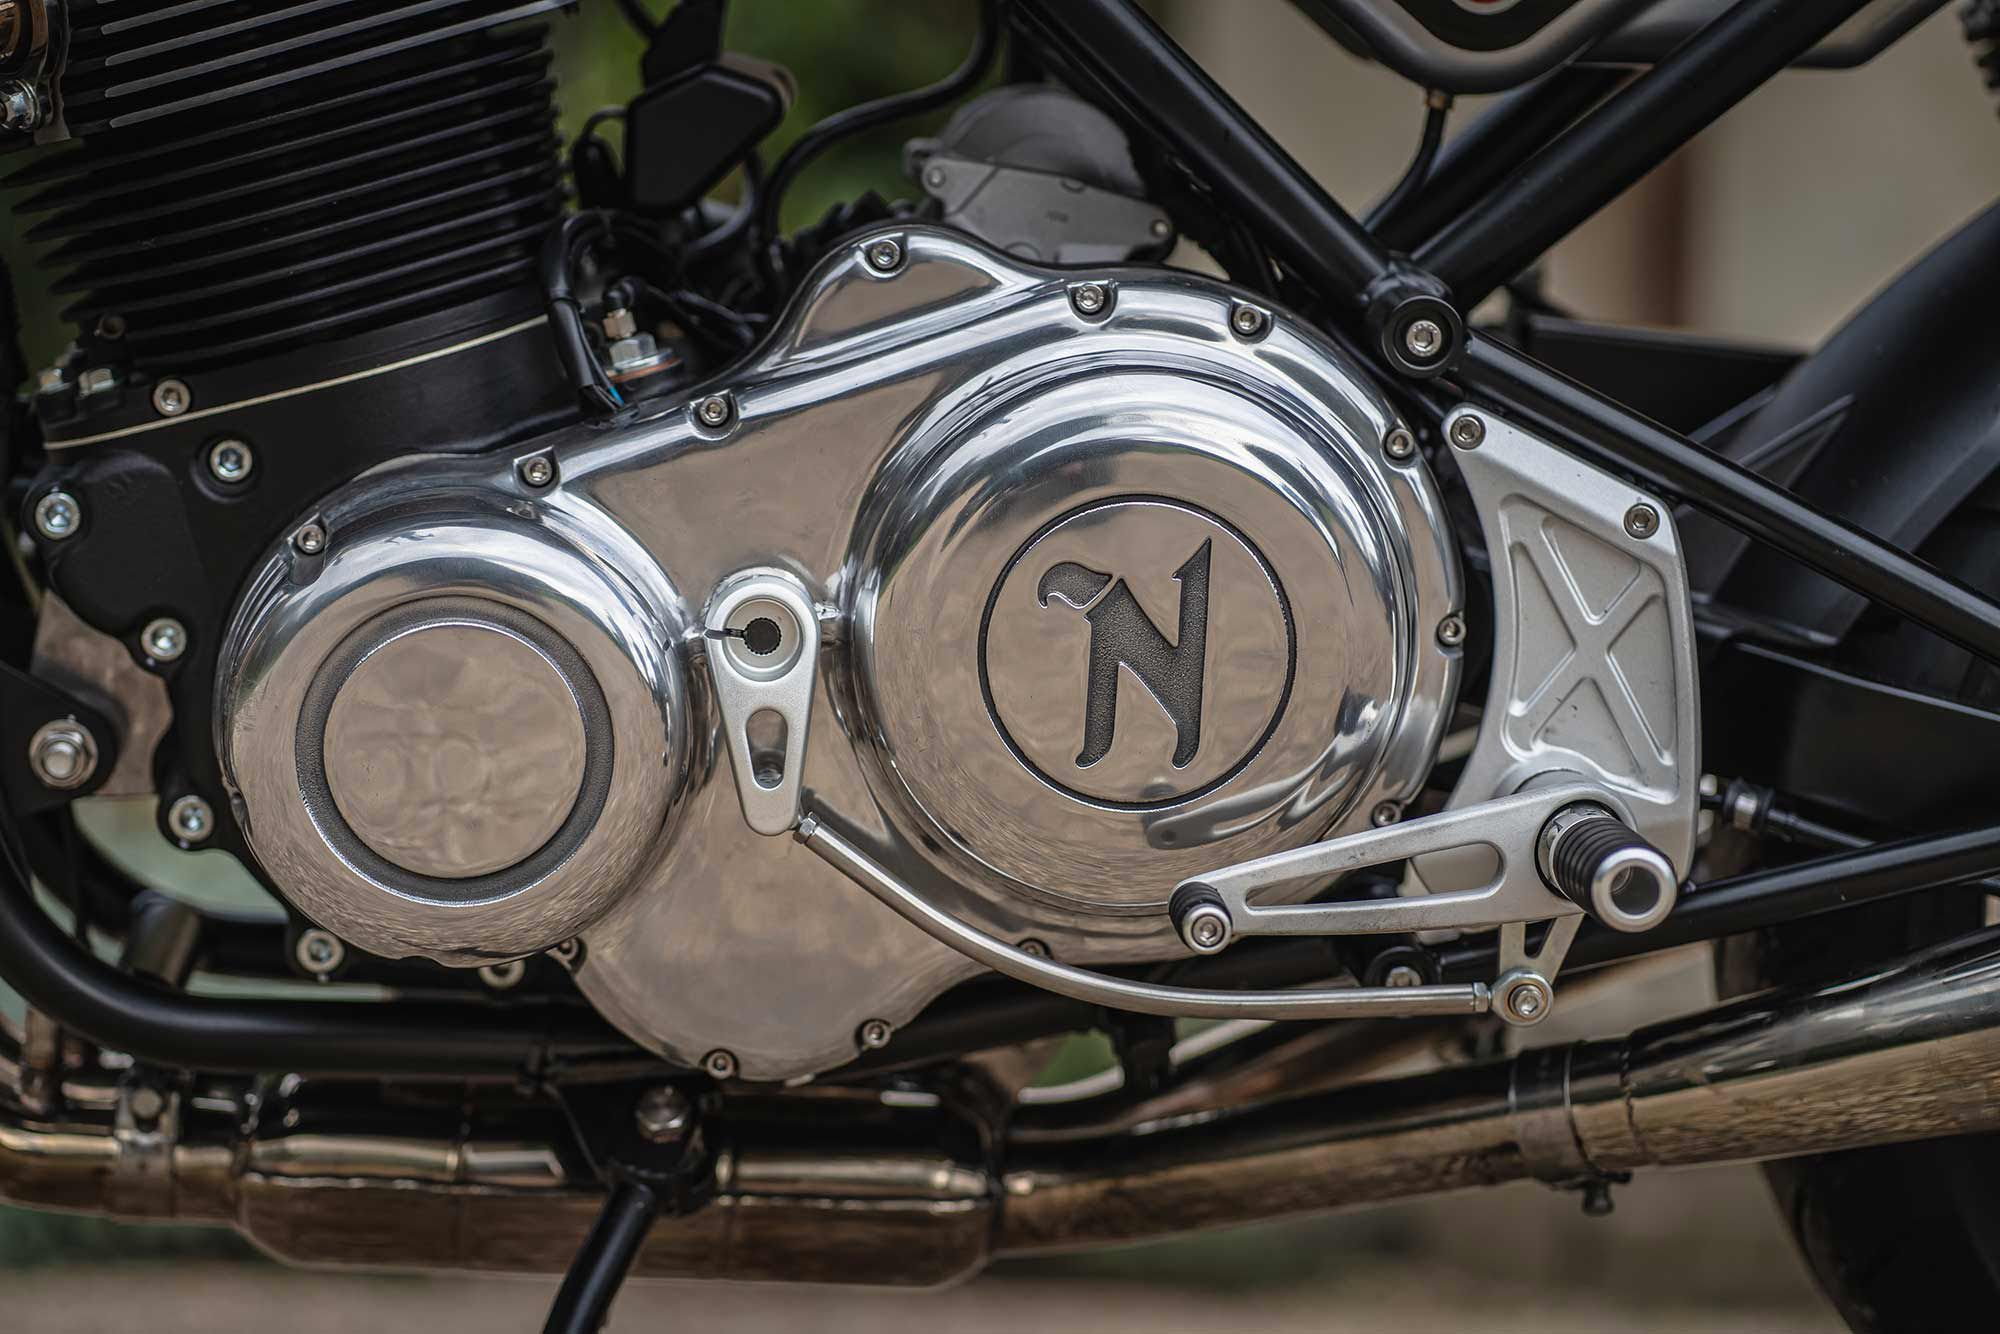 After extensive rig-endurance testing, Norton found premature wear on cams and in the valvetrain. The air-cooled motor has seen an extensive upgrade with new parts and materials.